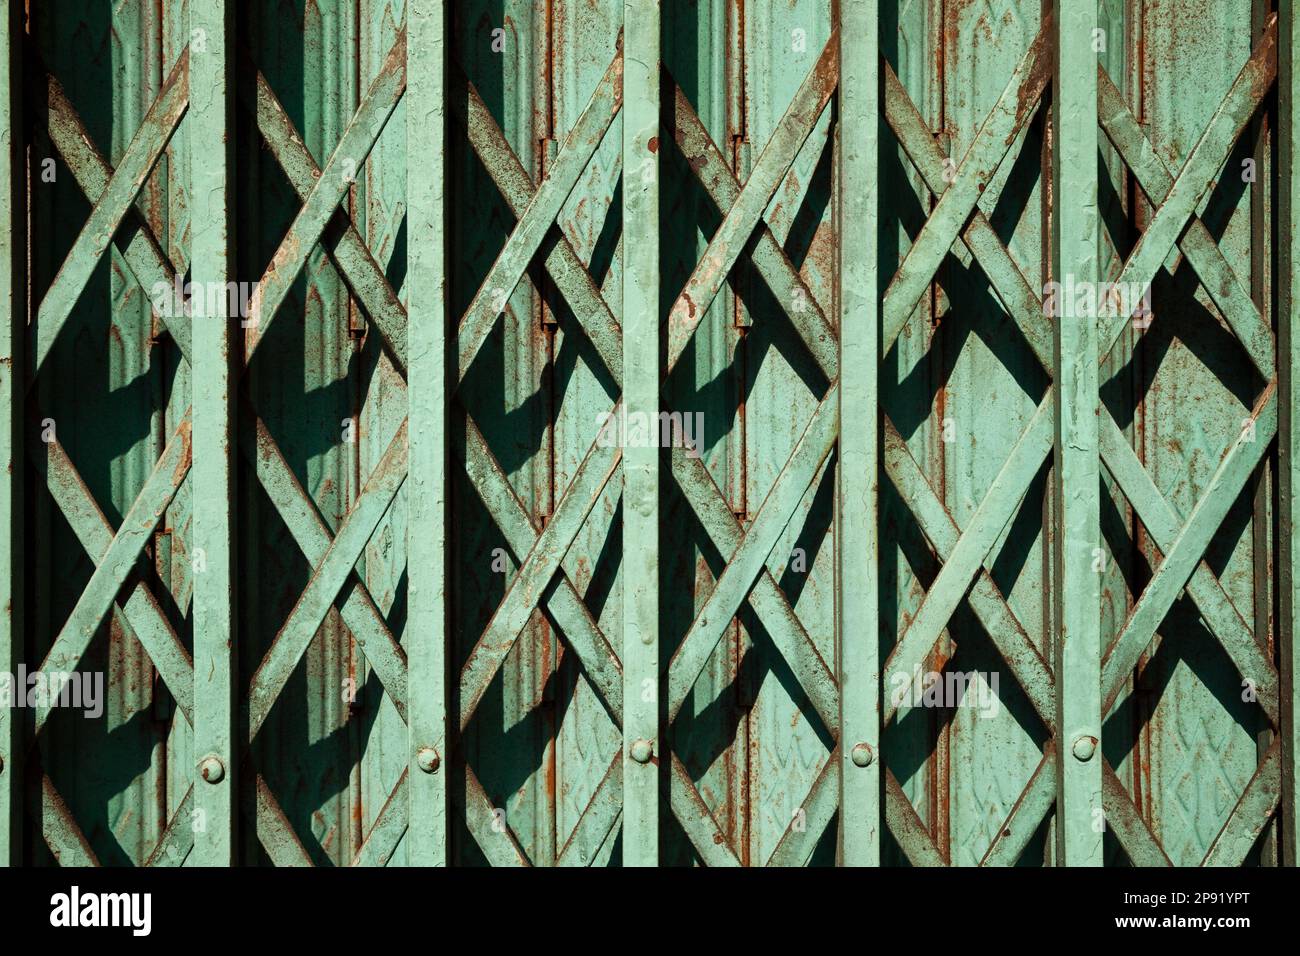 Teal color old rusty folding gate background. Green geometric pattern lattice on a store entrance. Closed Asian shop detail Stock Photo